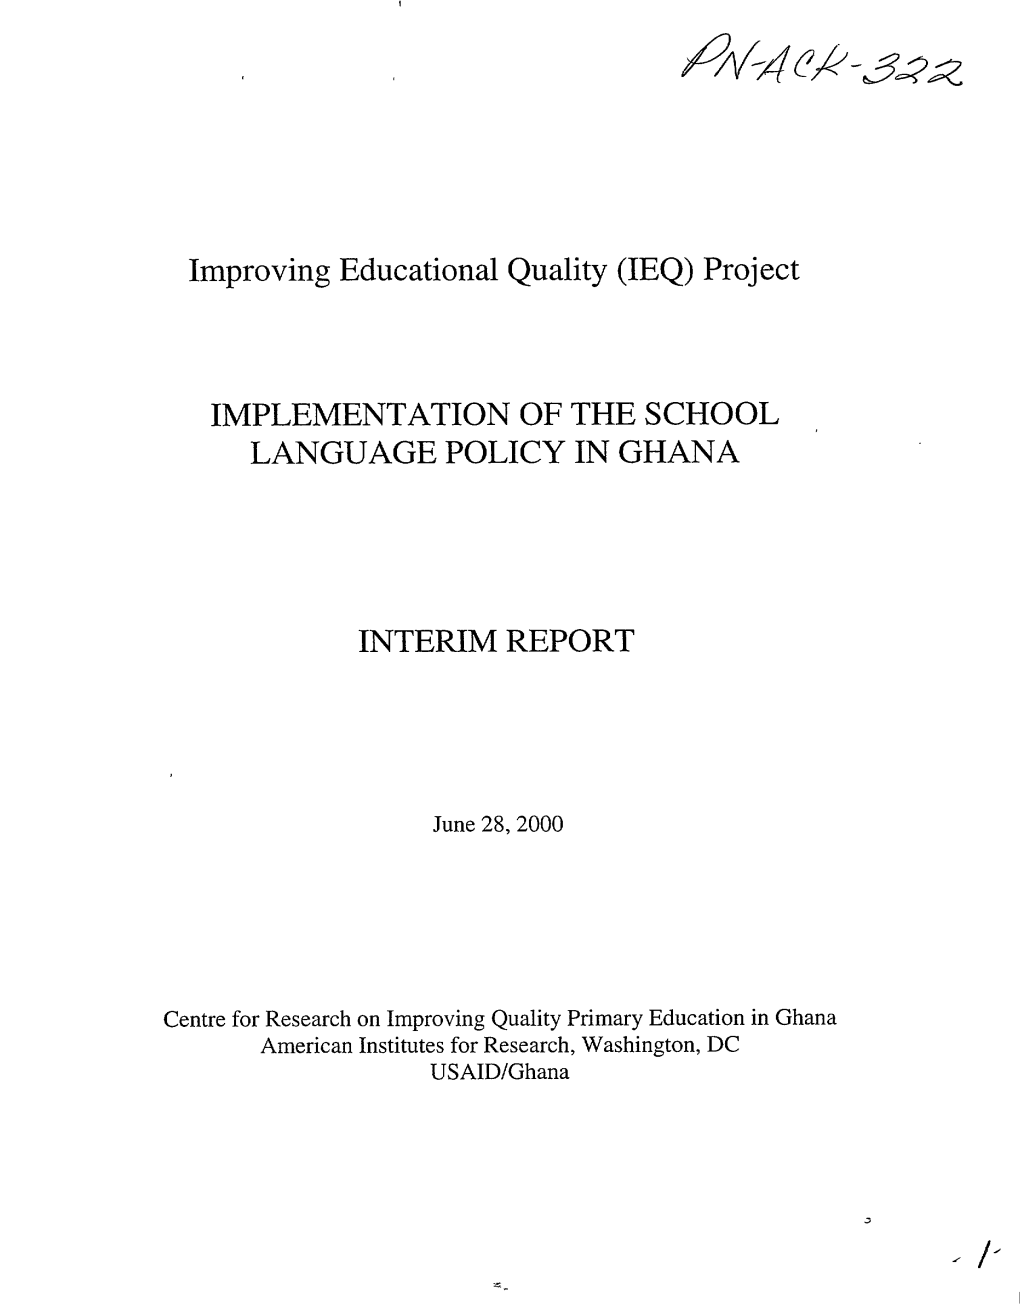 Improving Educational Quality (IEQ) Project